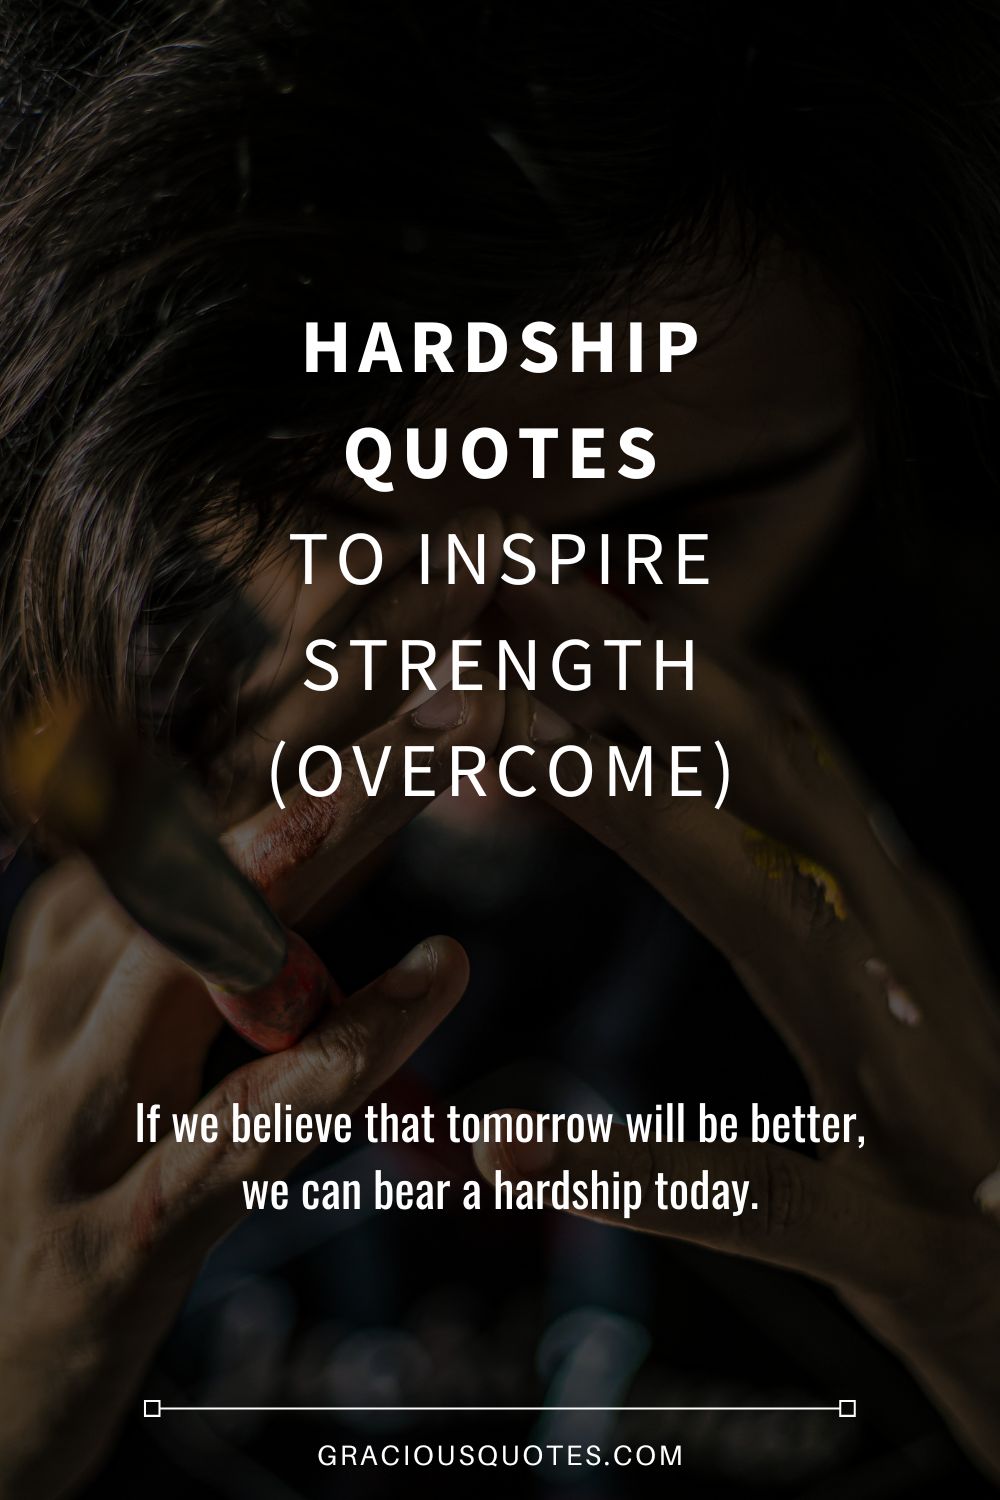 Hardship Quotes to Inspire Strength (OVERCOME) - Gracious Quotes